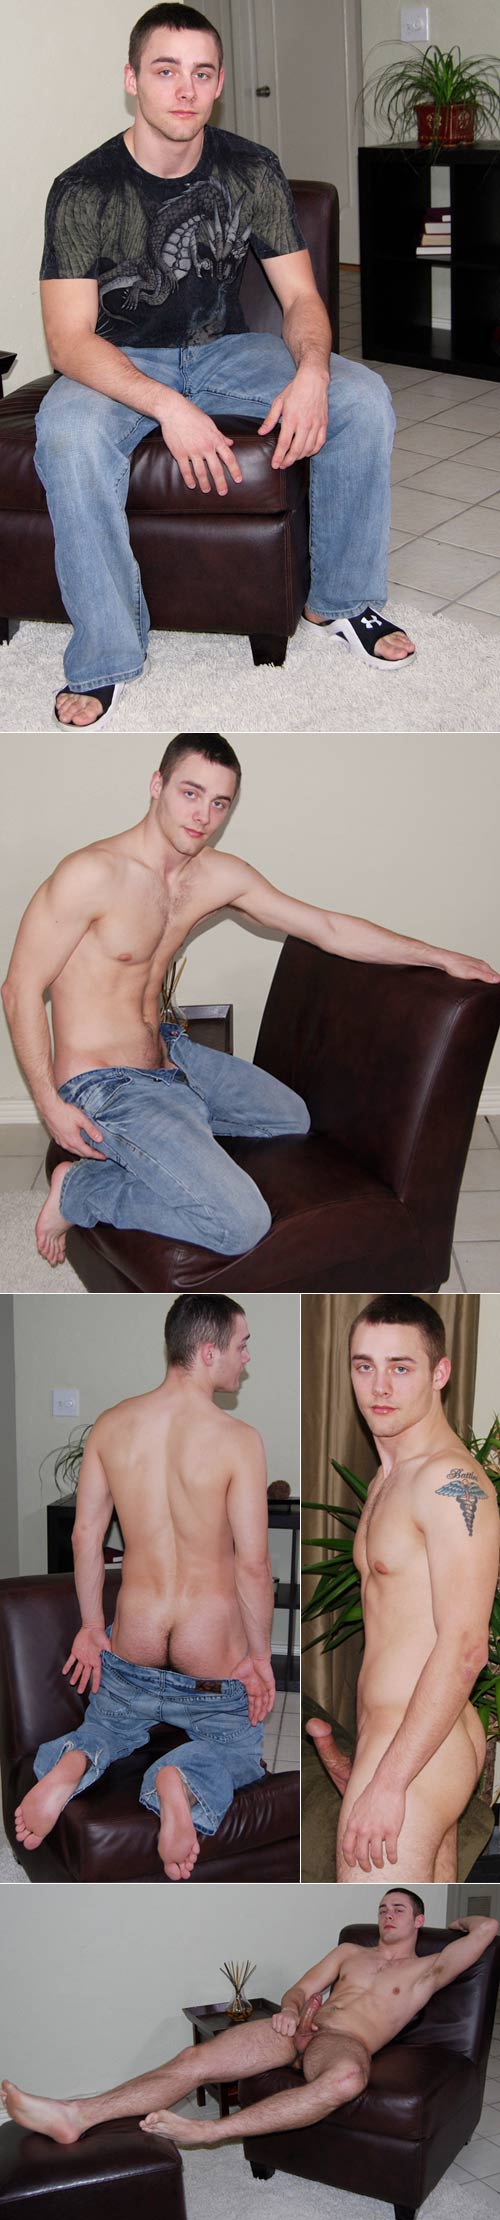 Buck Daemon Busts A Nut at CollegeDudes247